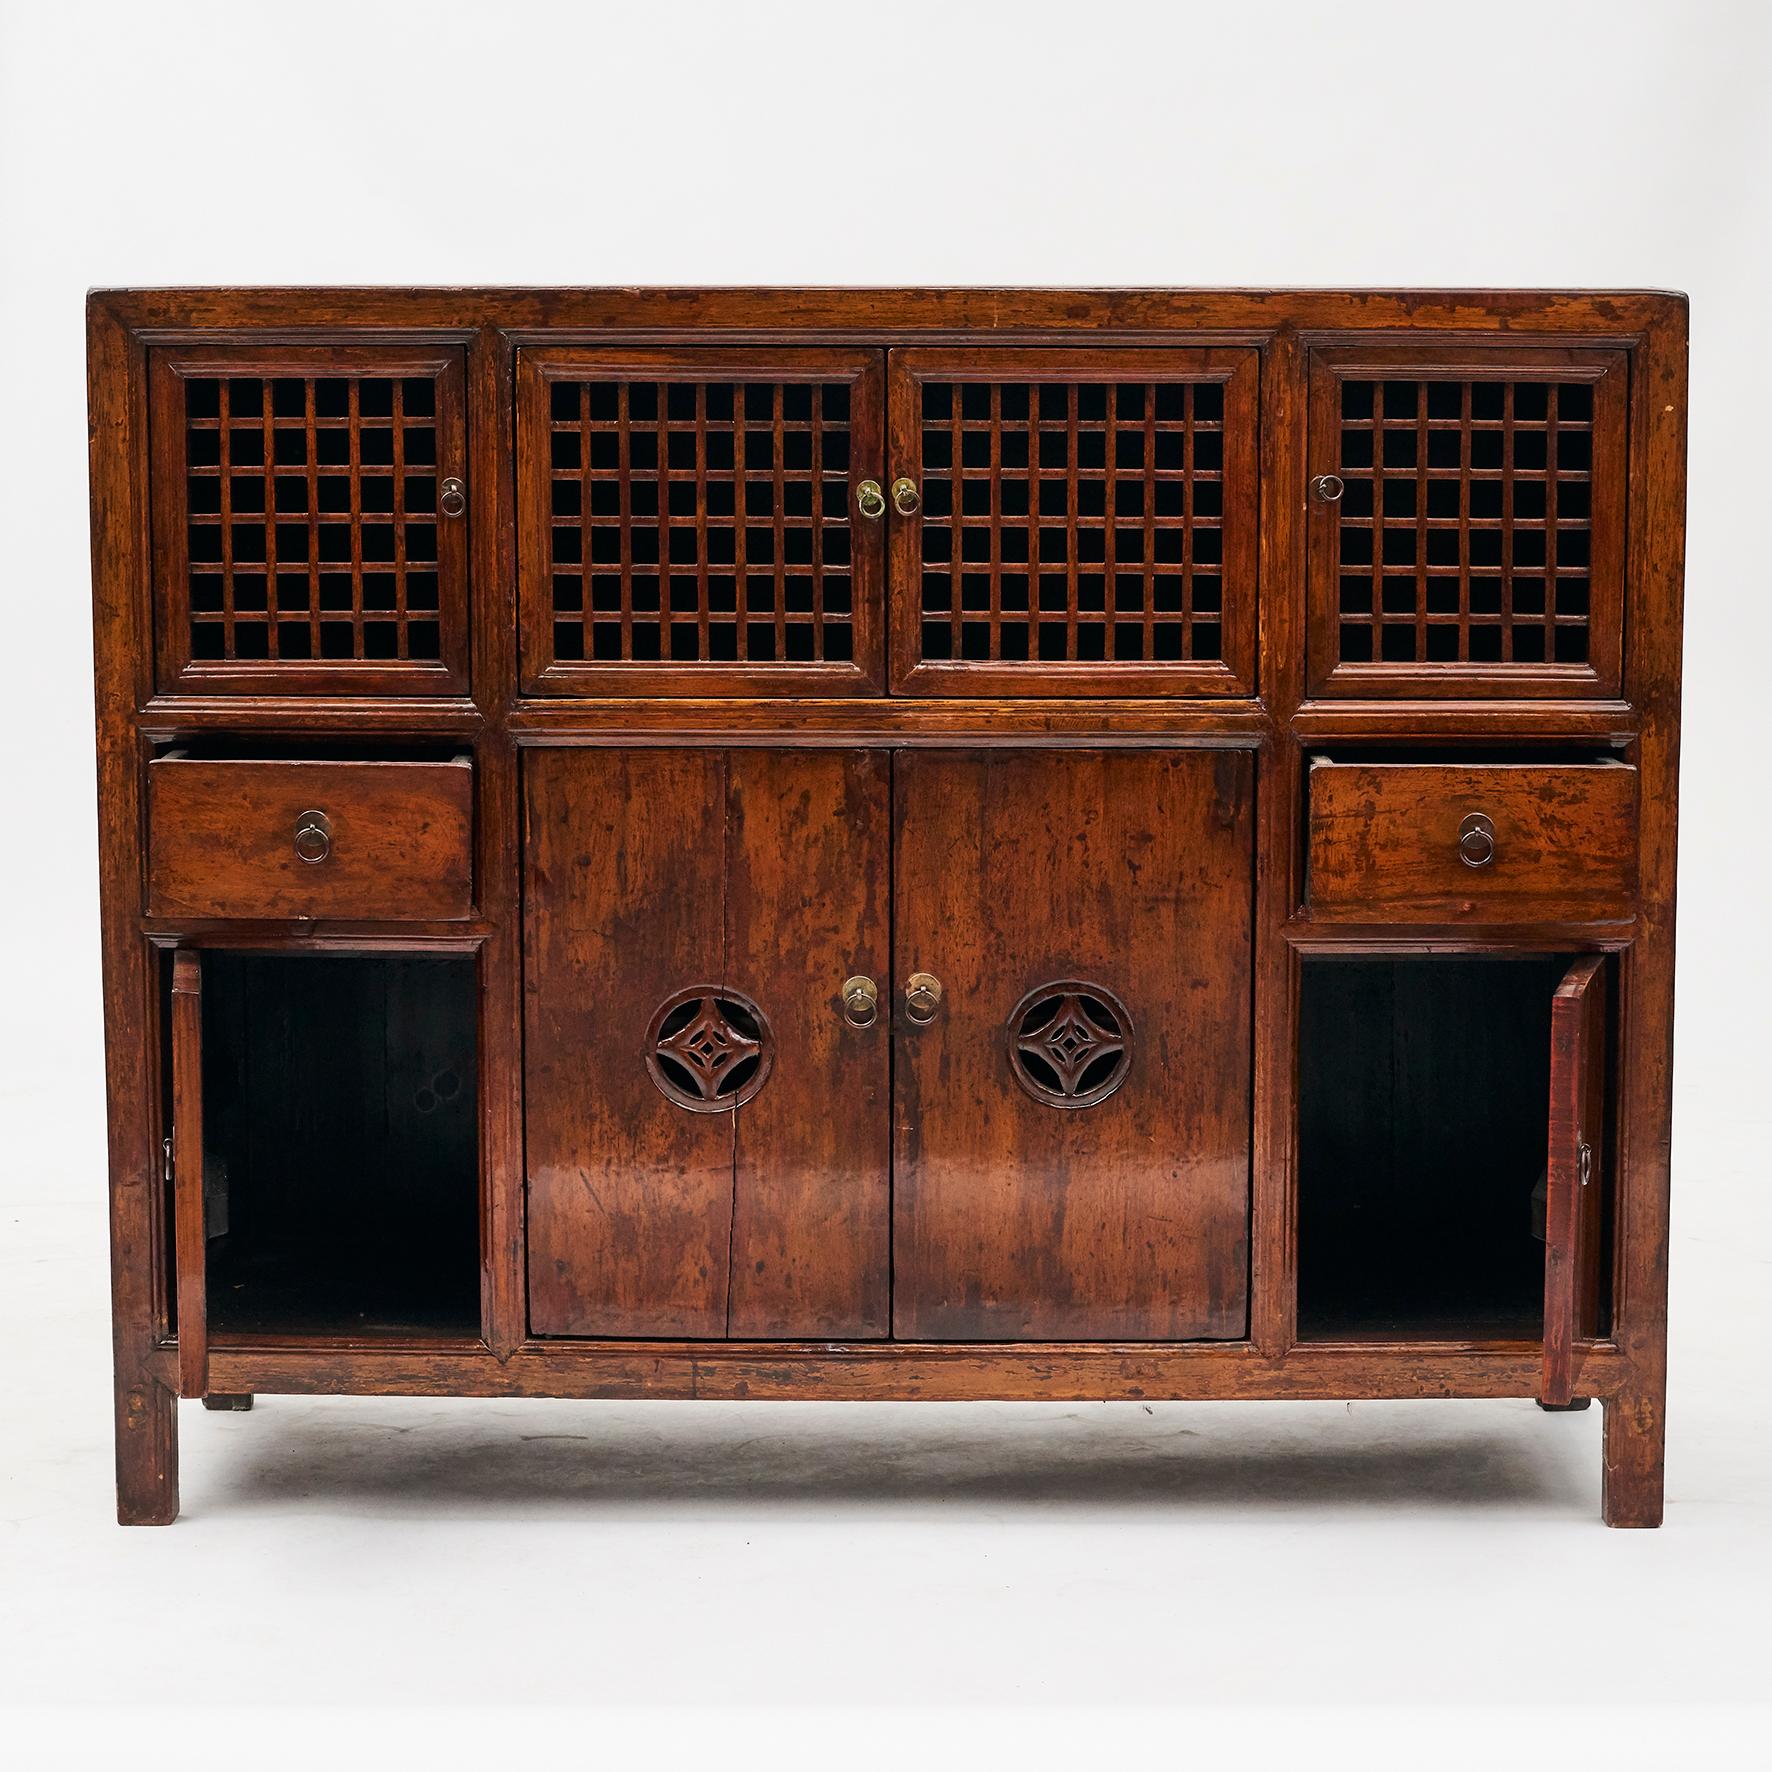 Lacquered 19th Century Chinese Lattice Door Cabinet with Original Lacquer